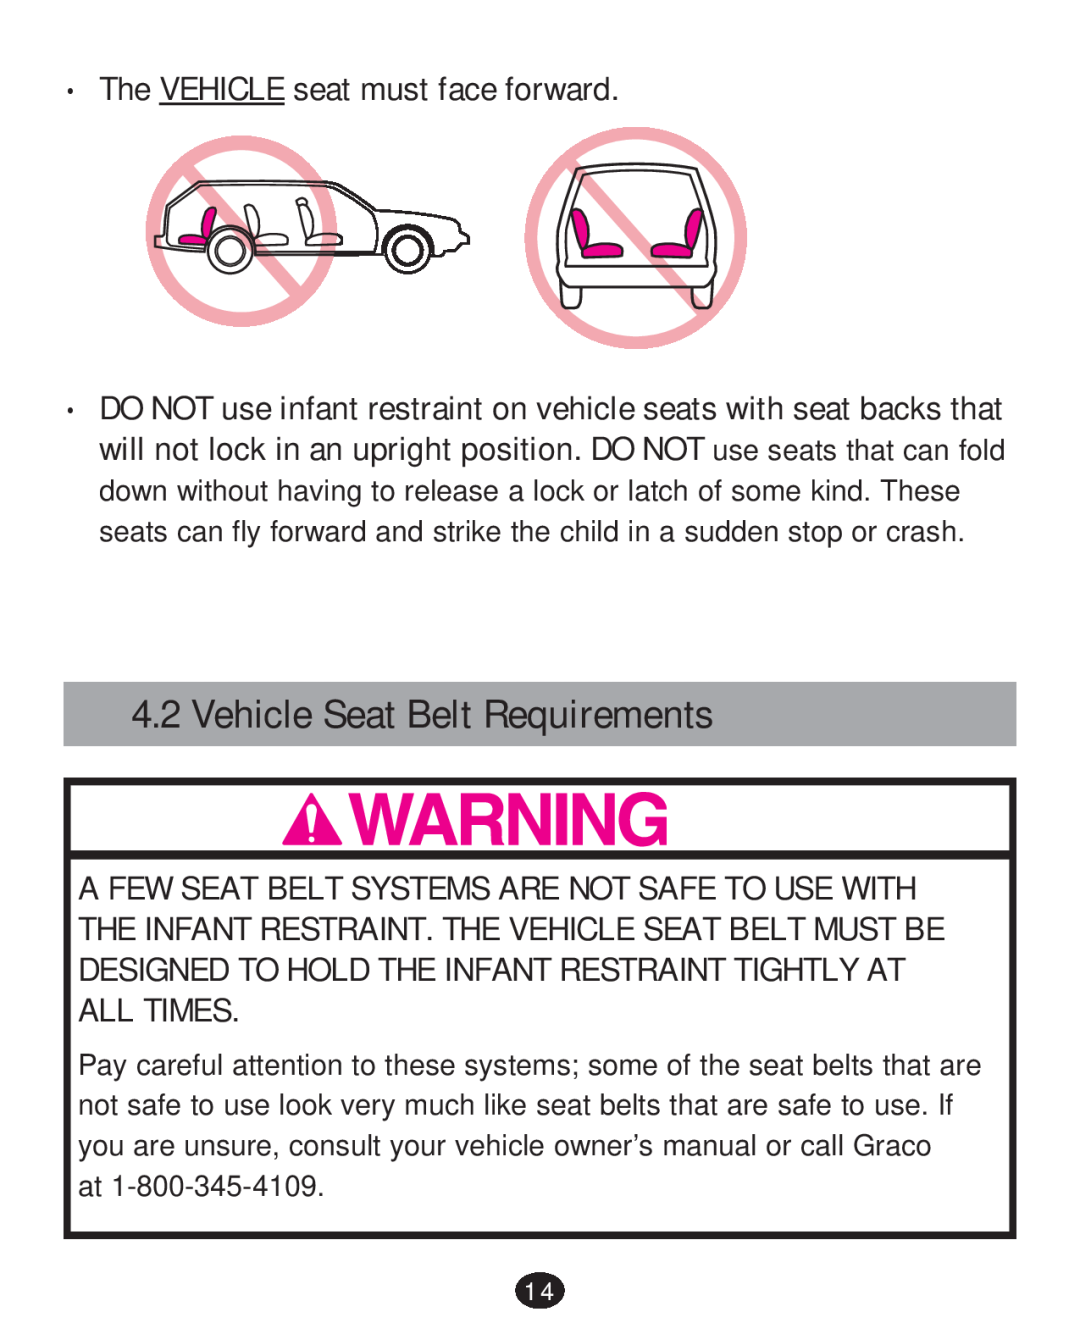 Graco 30 manual Vehicle Seat Belt Requirements, The VEHICLE seat must face forward 